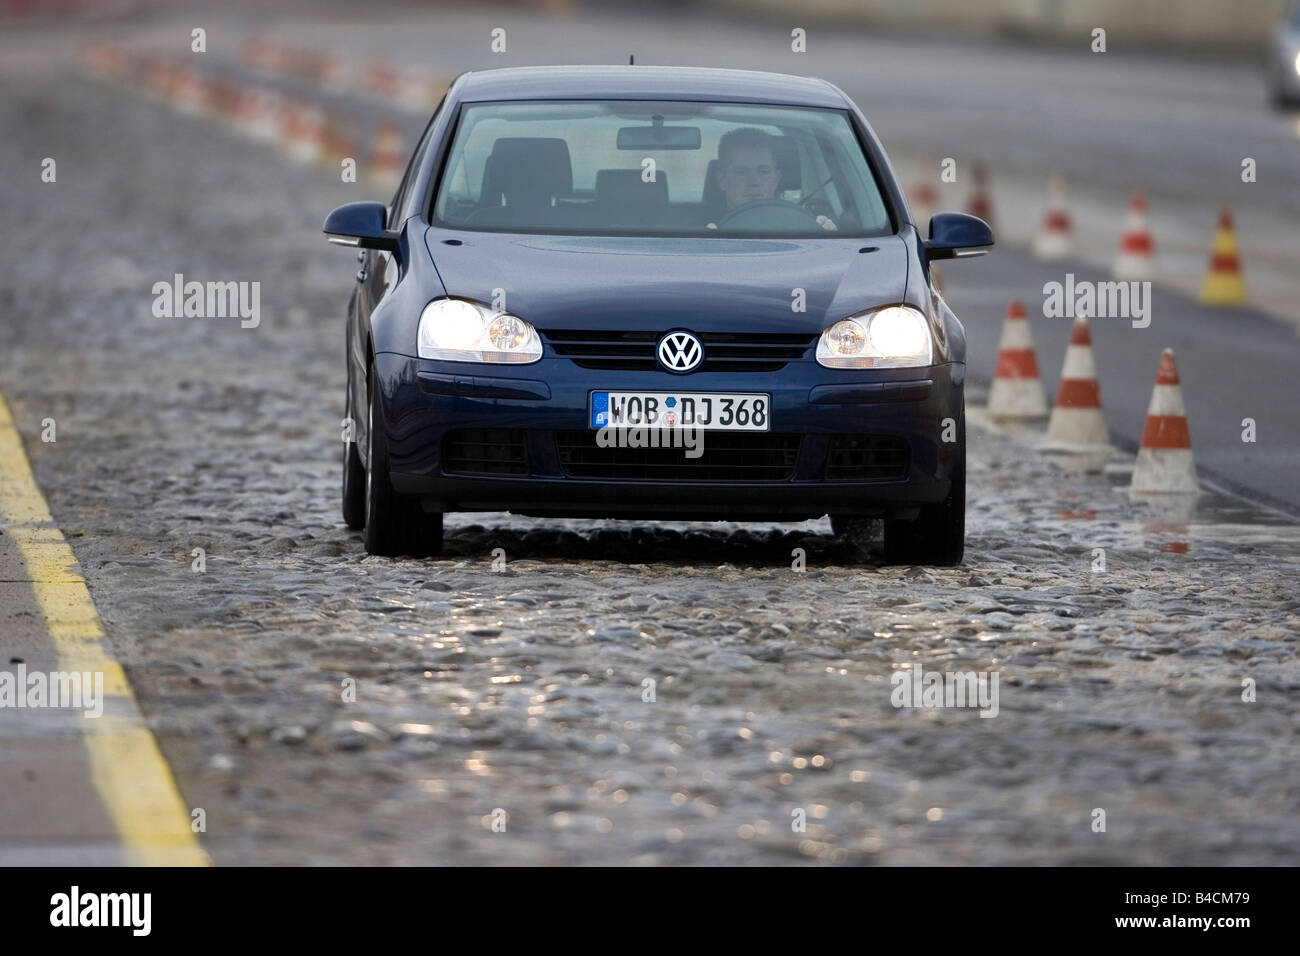 VW Volkswagen Golf GT 2.0 TDI, dark blue, model year 2005-, driving,  diagonal from the front, frontal view, Pilonen, Test track Stock Photo -  Alamy